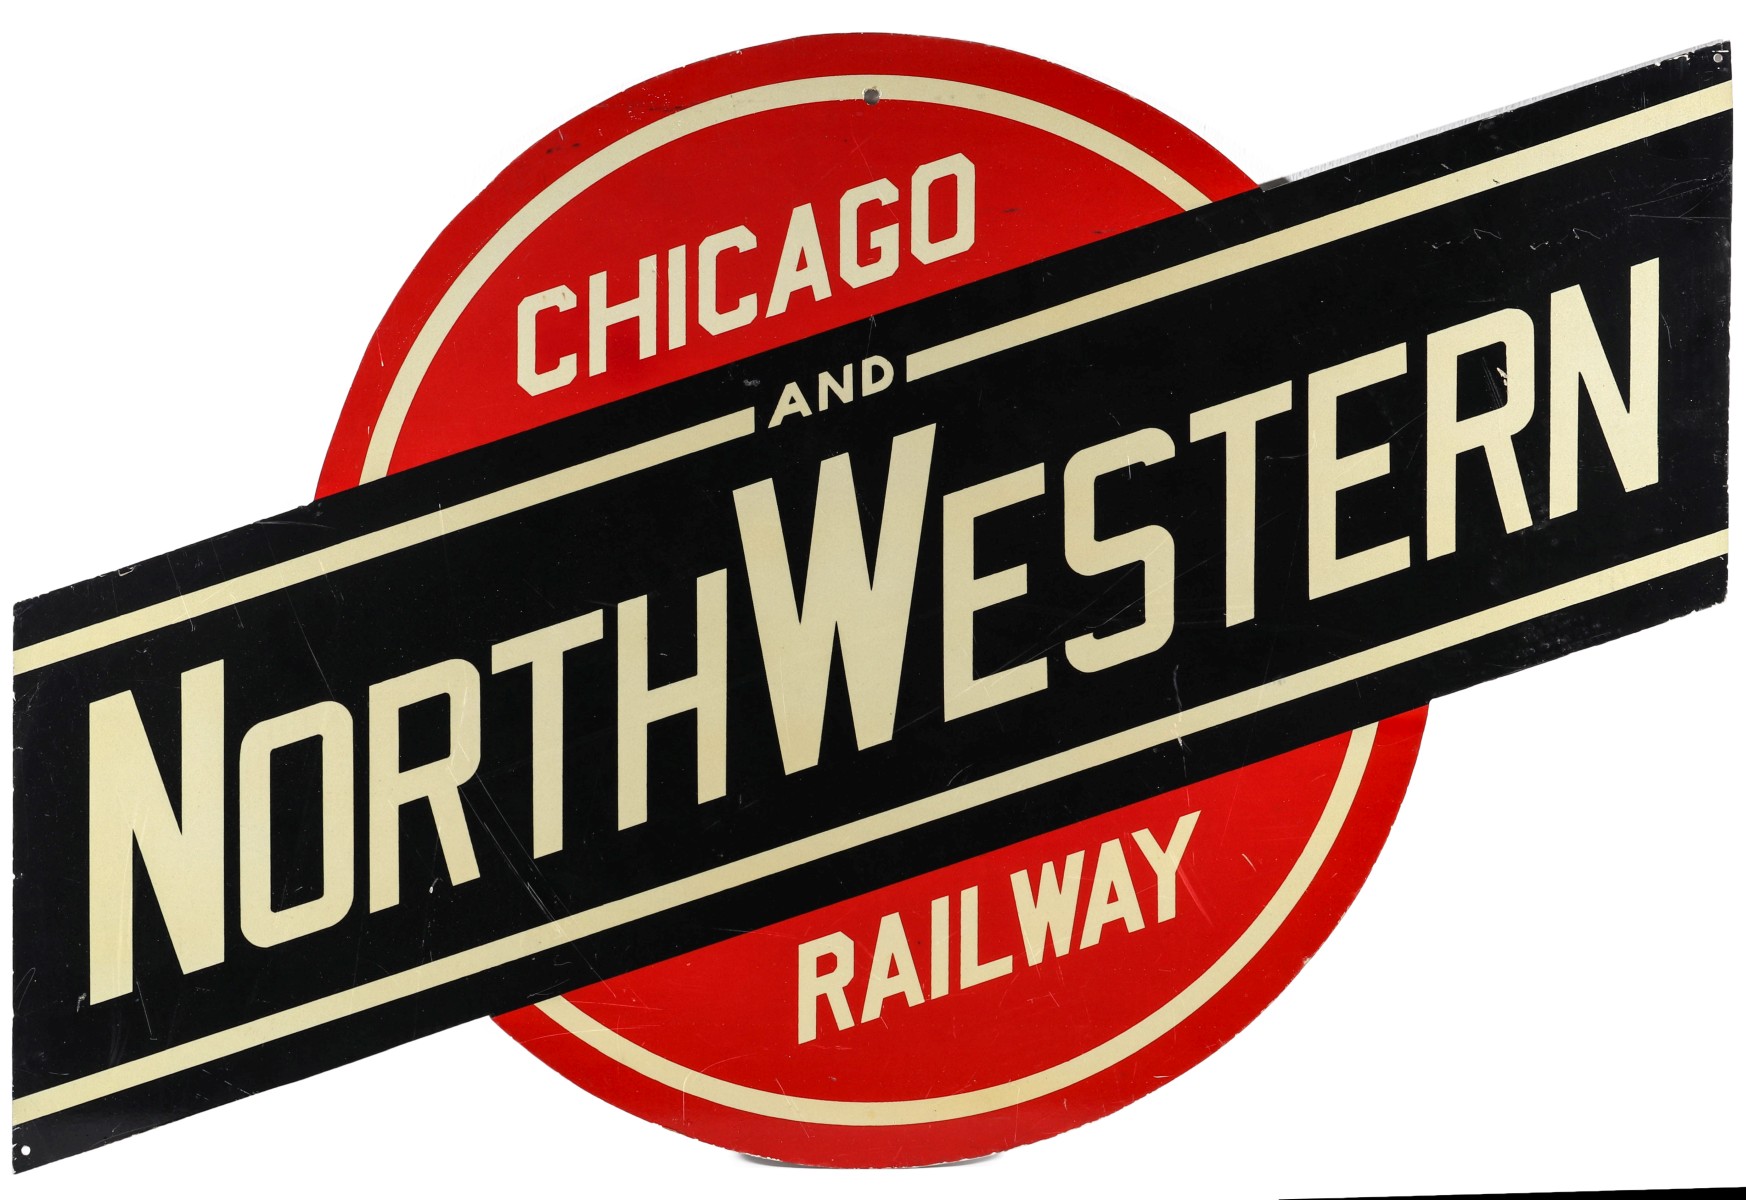 A PAINTED METAL SIGN FOR THE CHICAGO AND NORTHWESTERN